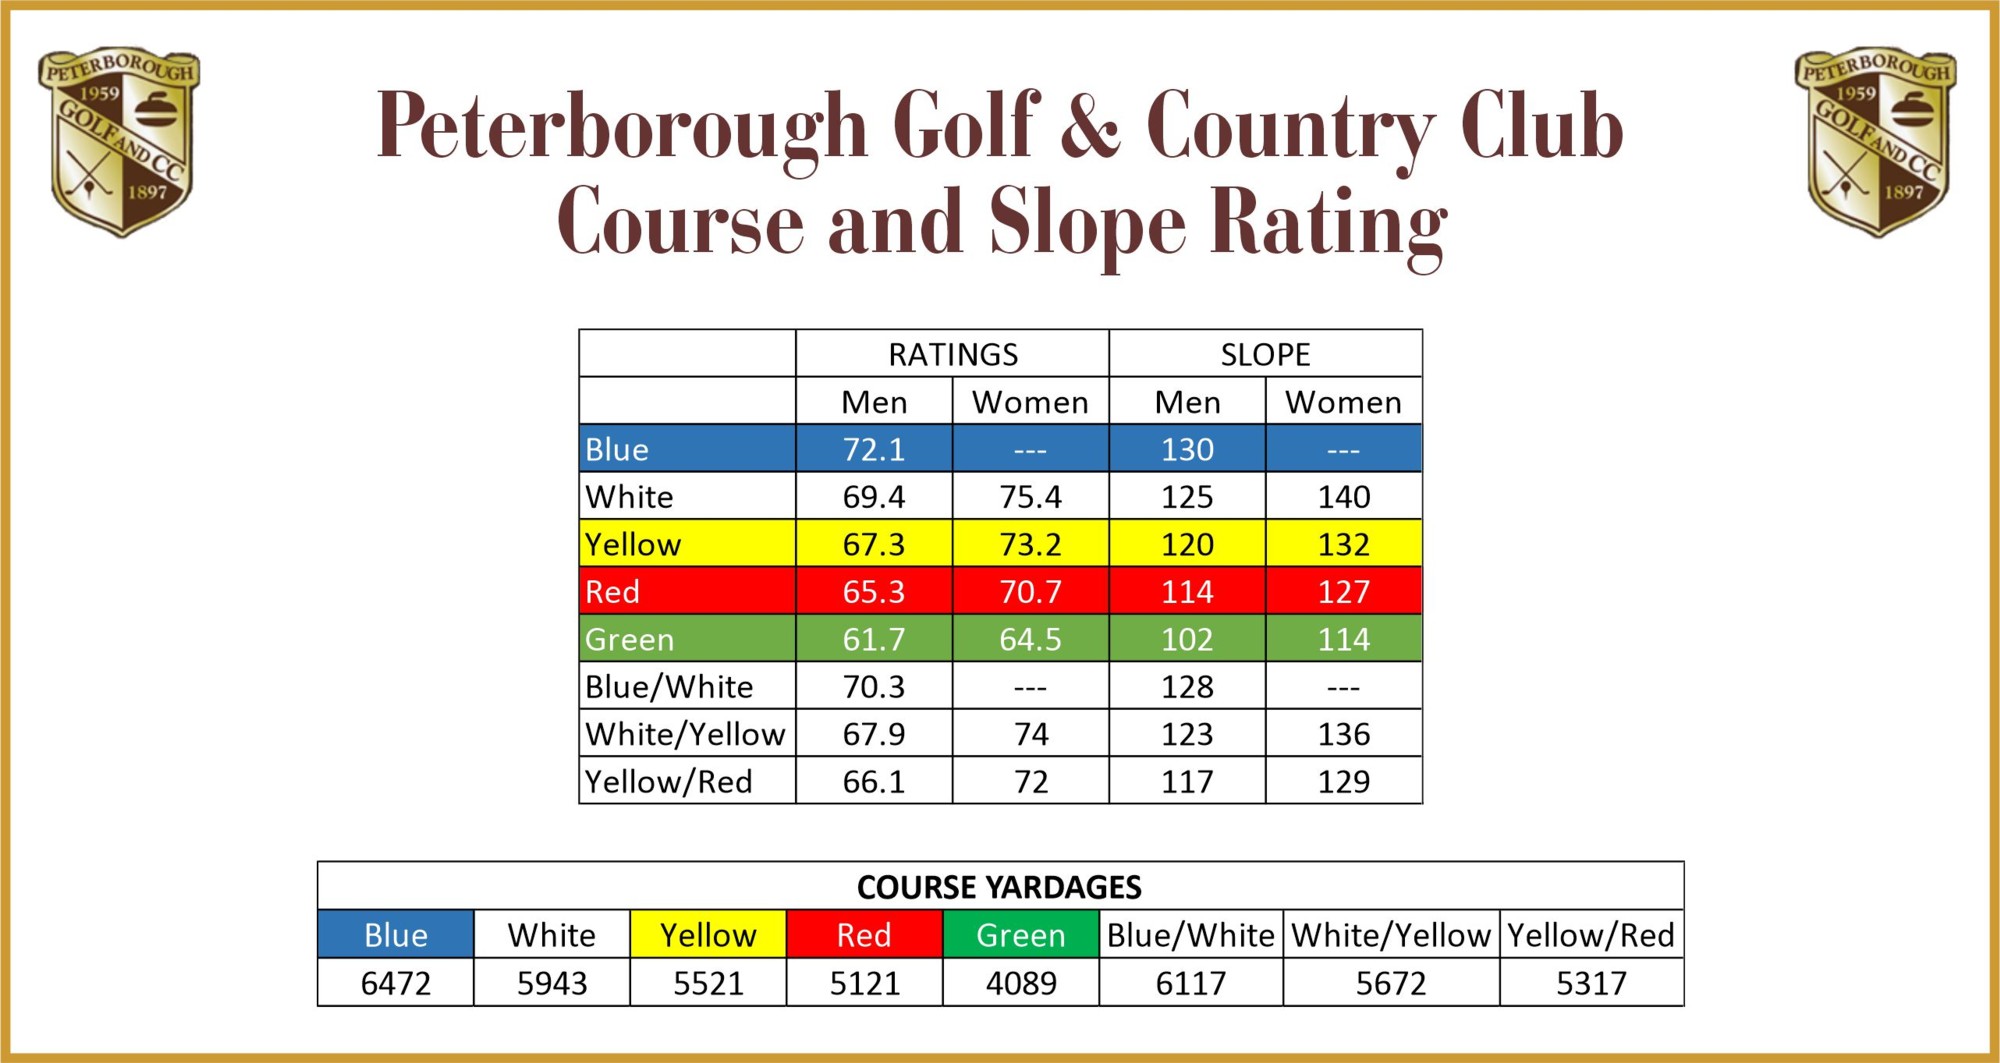 Course Scorecard, Map & Hole by Hole Overview - Peterborough Golf & Country  Club